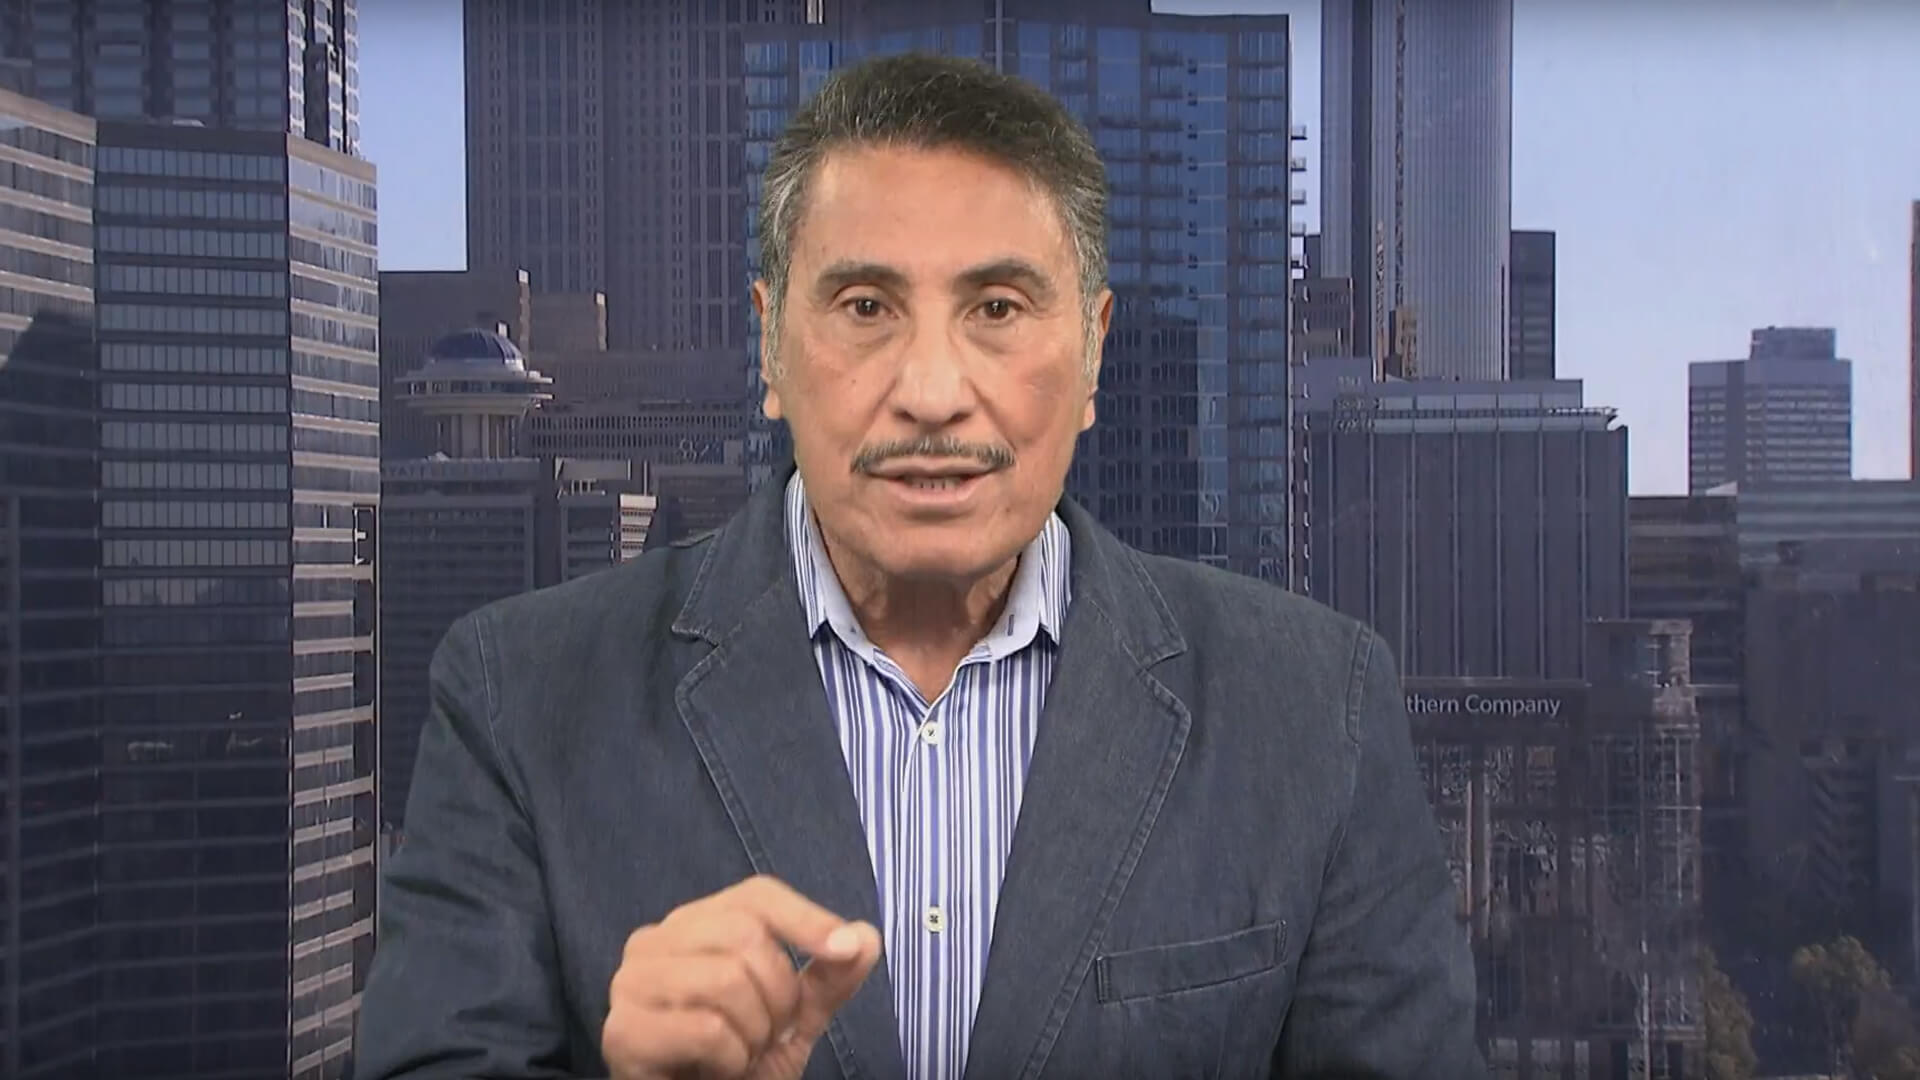 Dr. Michael Youssef Responds to 'The View' Hosts’ Attack on Christianity